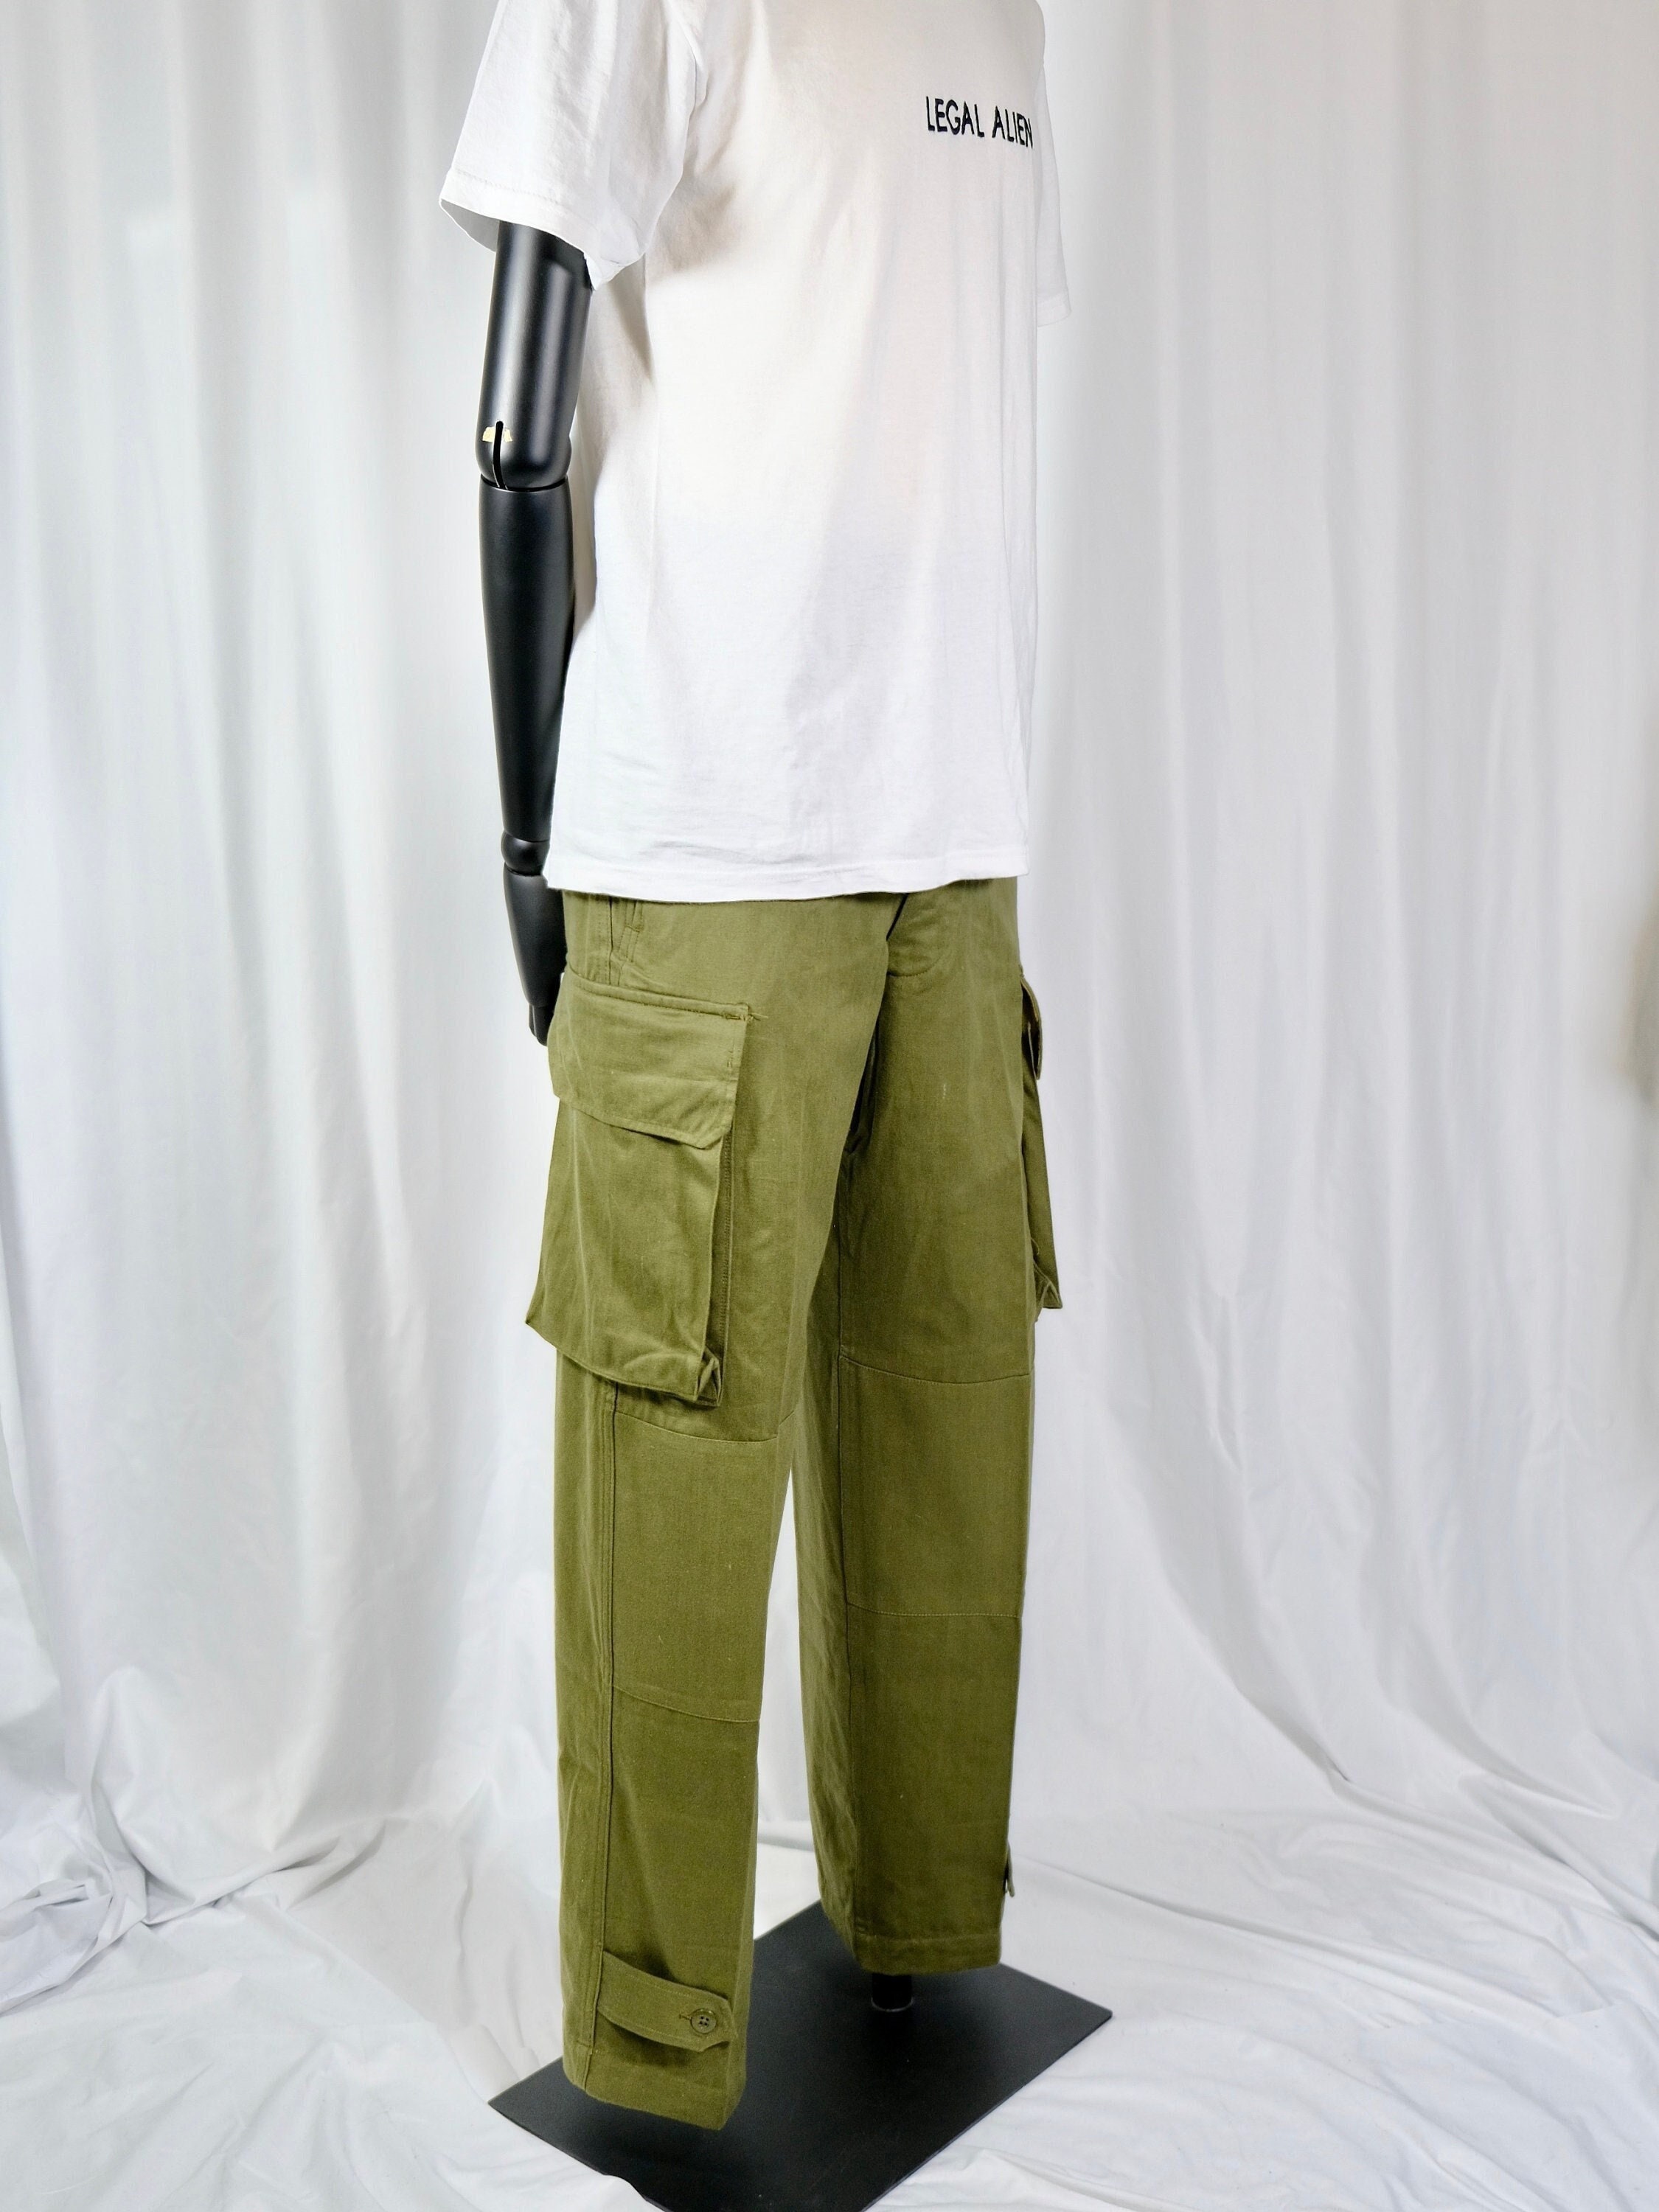 MILITARY DEADSTOCK M47 Pant: Non Wash French Army Pants 1960